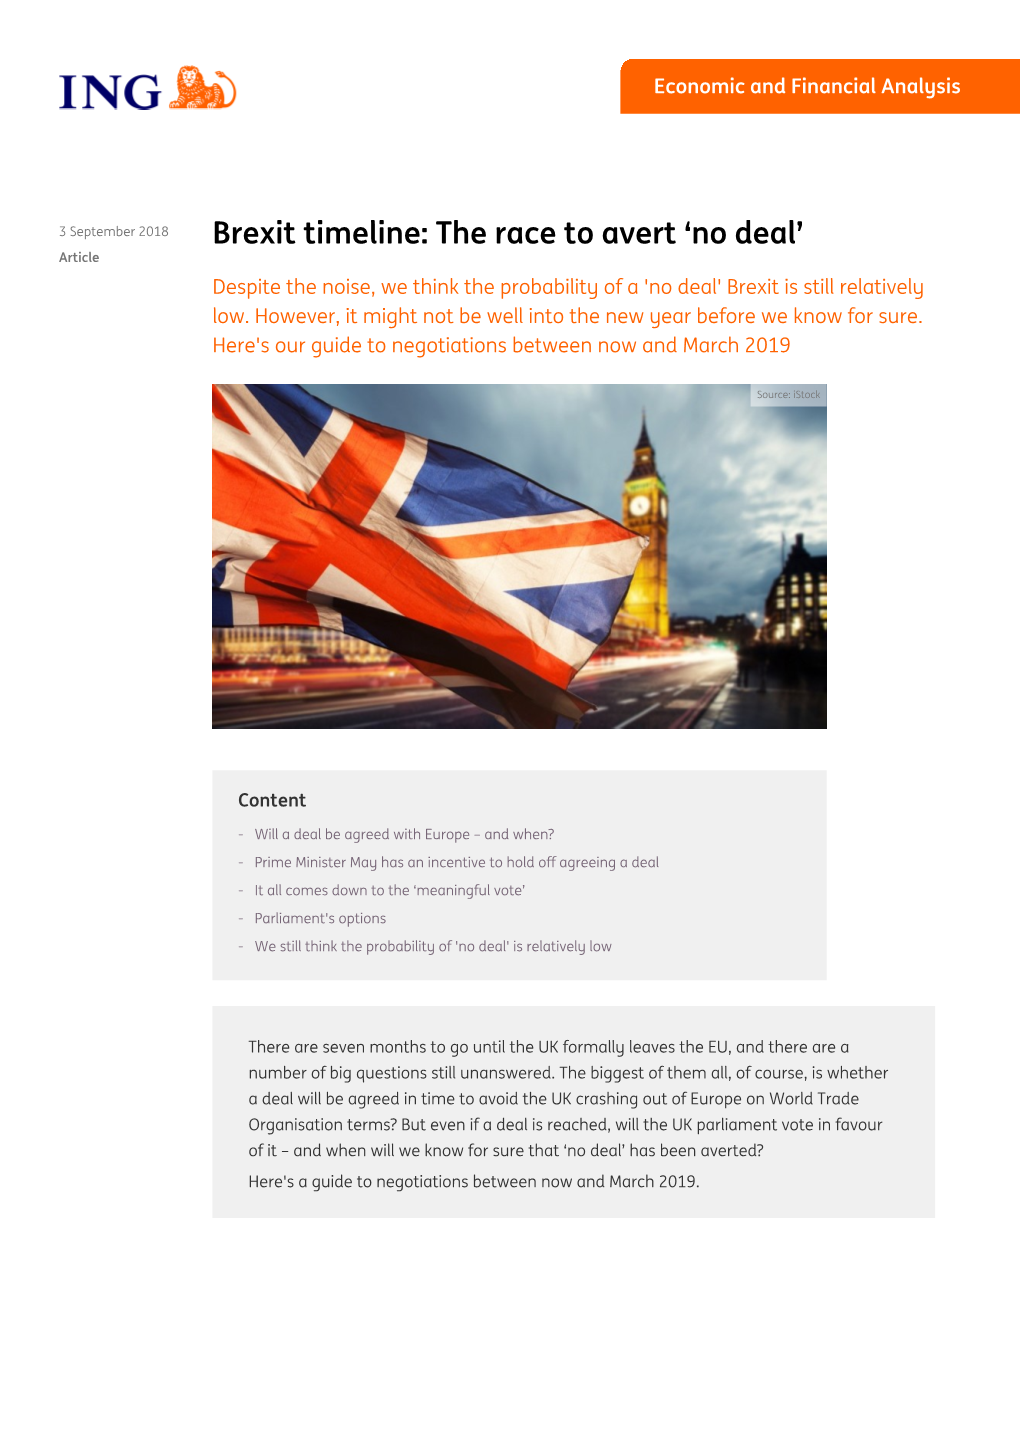 Brexit Timeline: the Race to Avert ‘No Deal’ Article Despite the Noise, We Think the Probability of a 'No Deal' Brexit Is Still Relatively Low